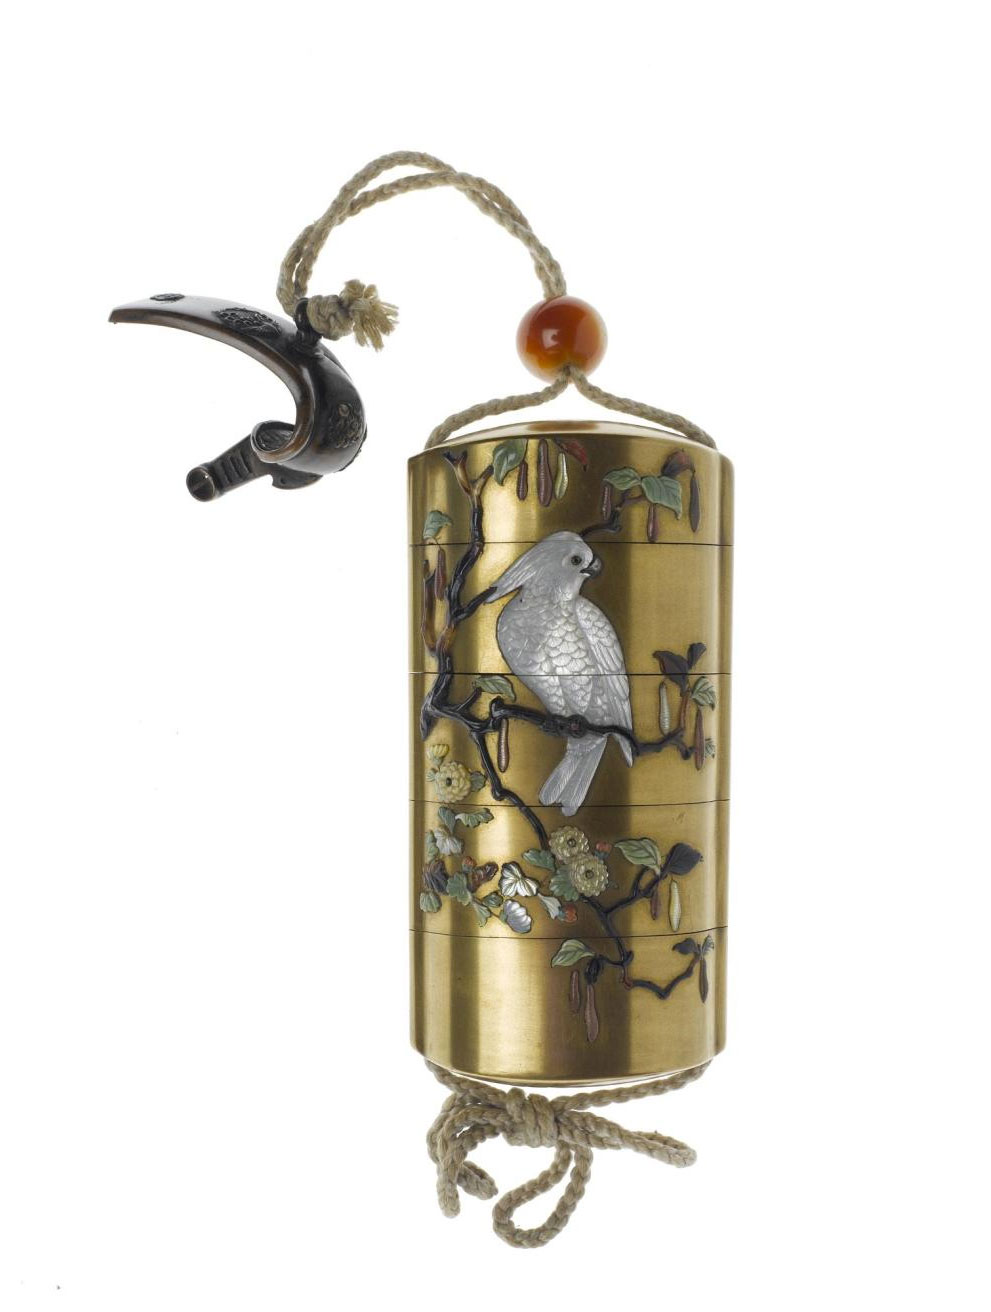 Inro with four compartments, of lacquered wood decorated Shibayama style in mother-of-pearl, steatite, jadeite and tortoiseshell with a cockatiel on a branch, suspended from a stirrup-shaped netsuke of bronze, and held by an ojime of agate: Japan, 19th century.